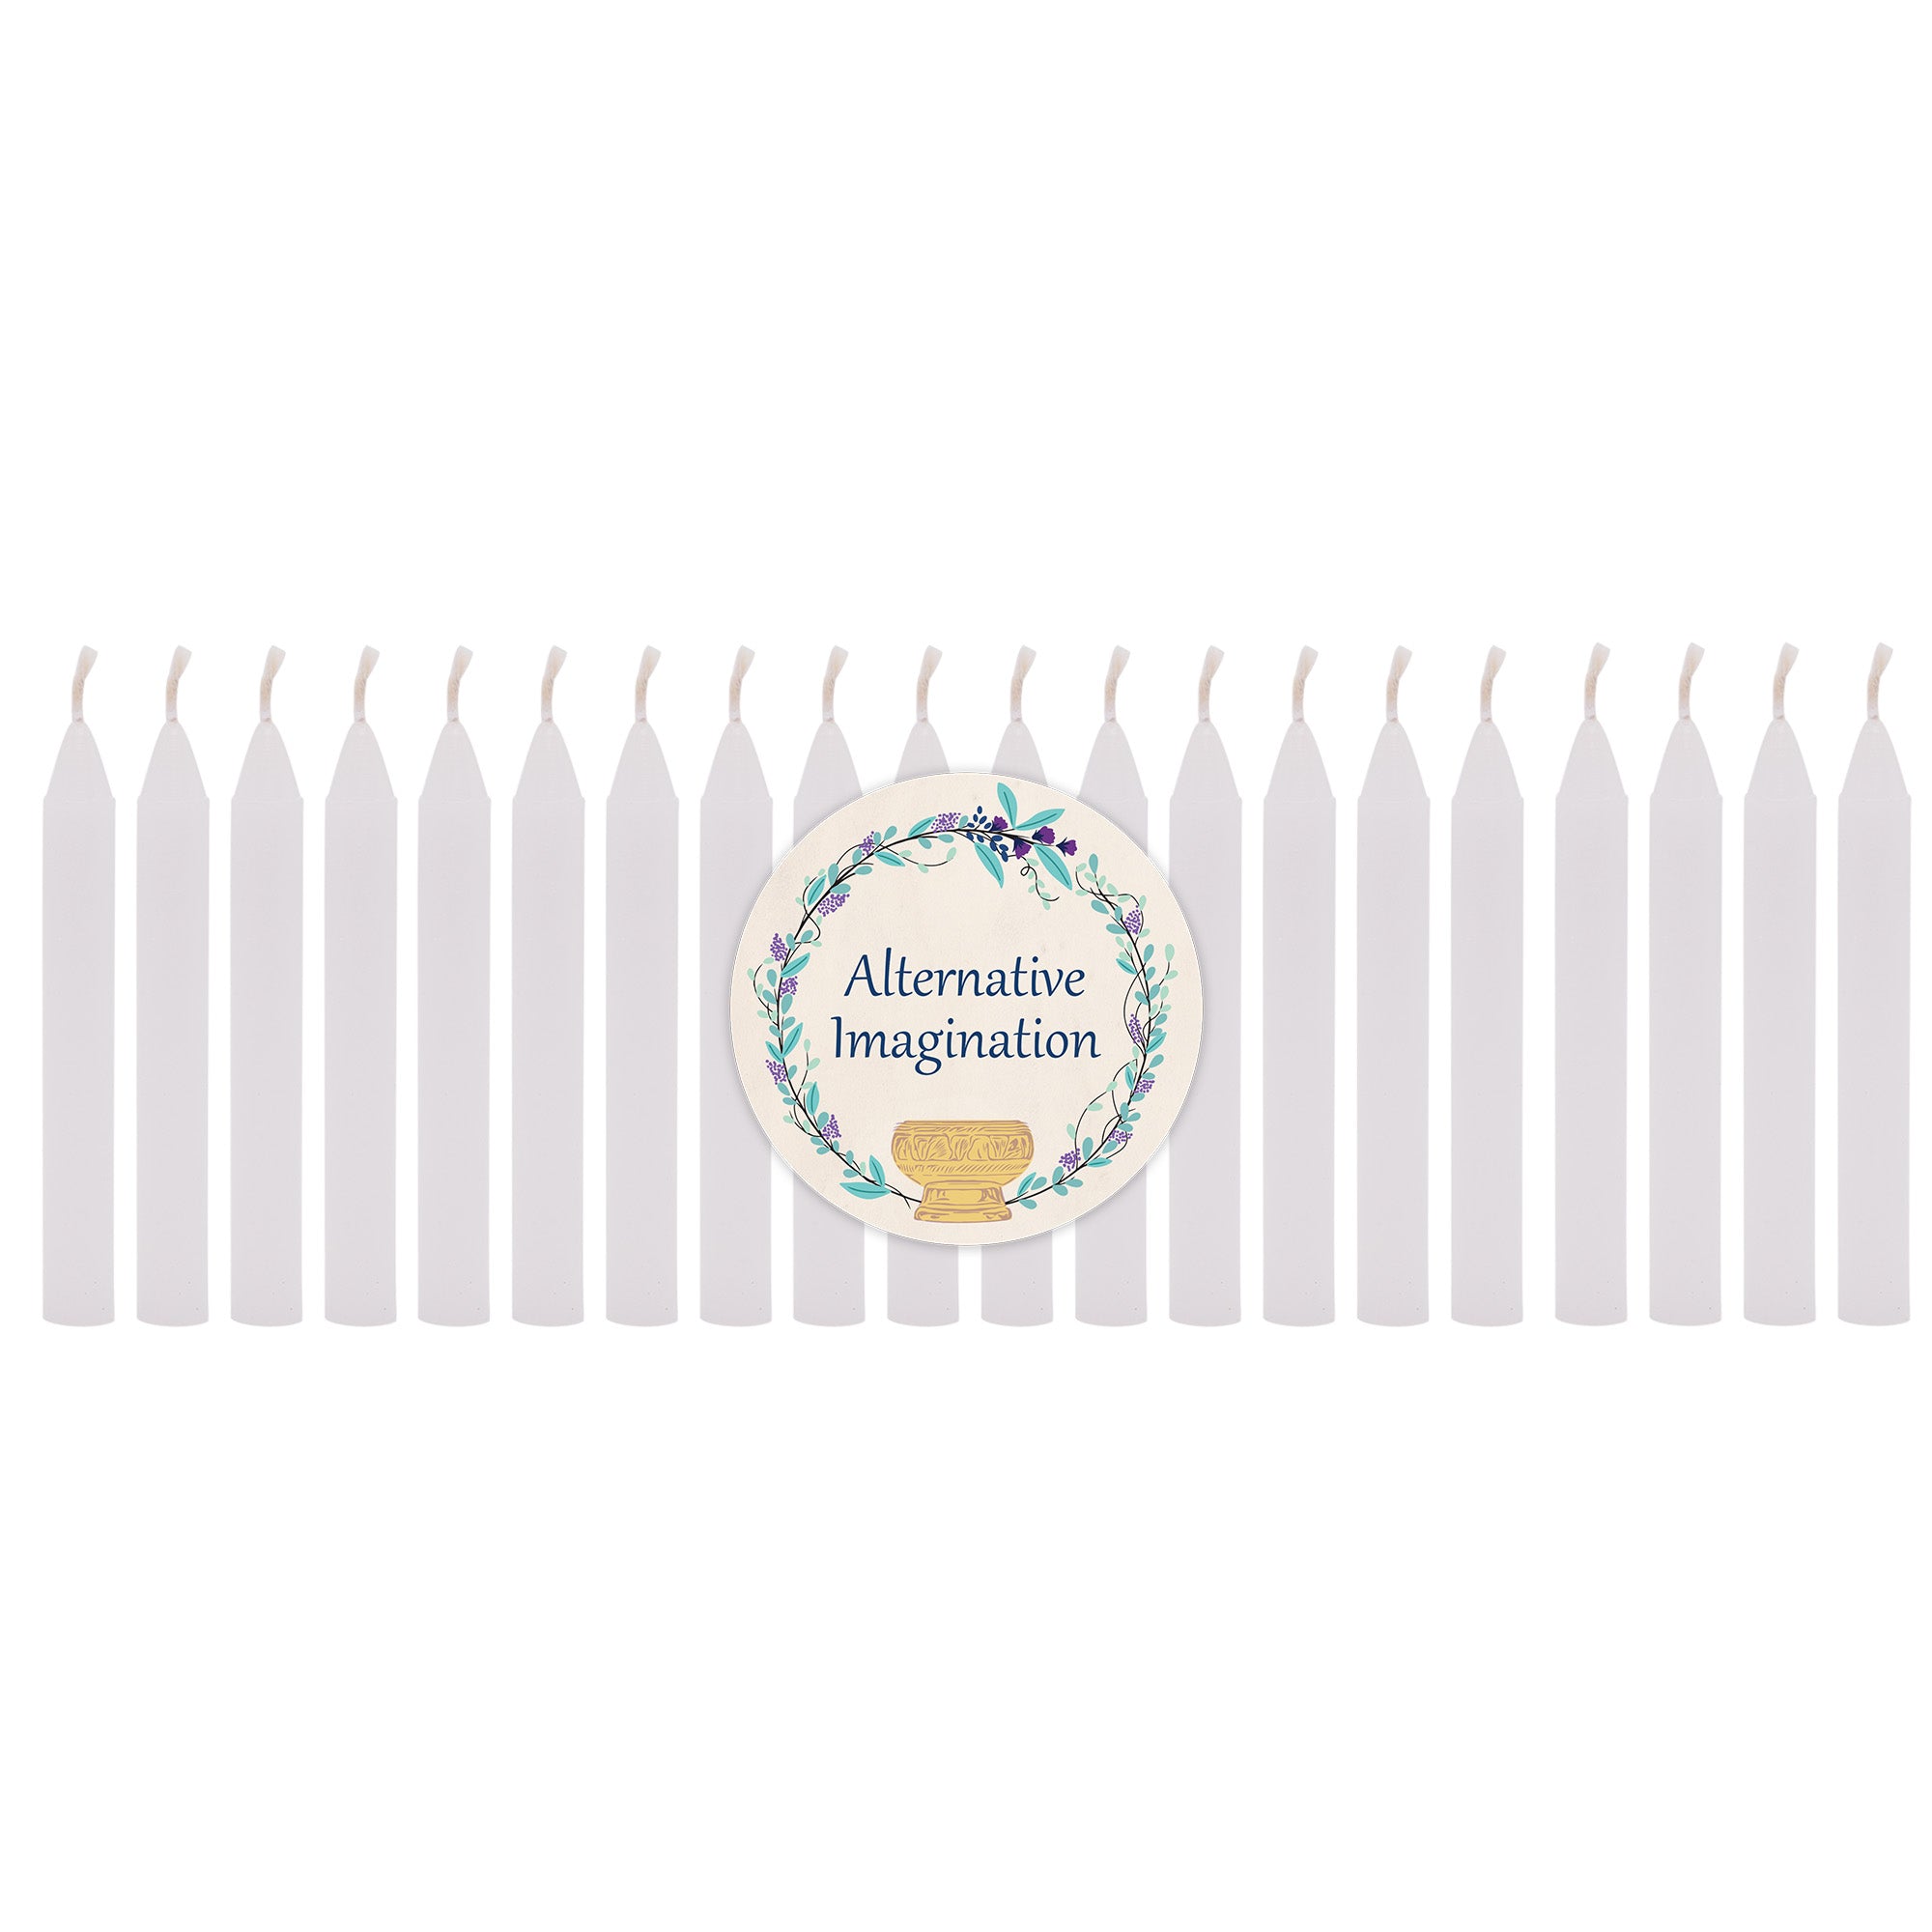 Spell Chime Candles - 20 Pack